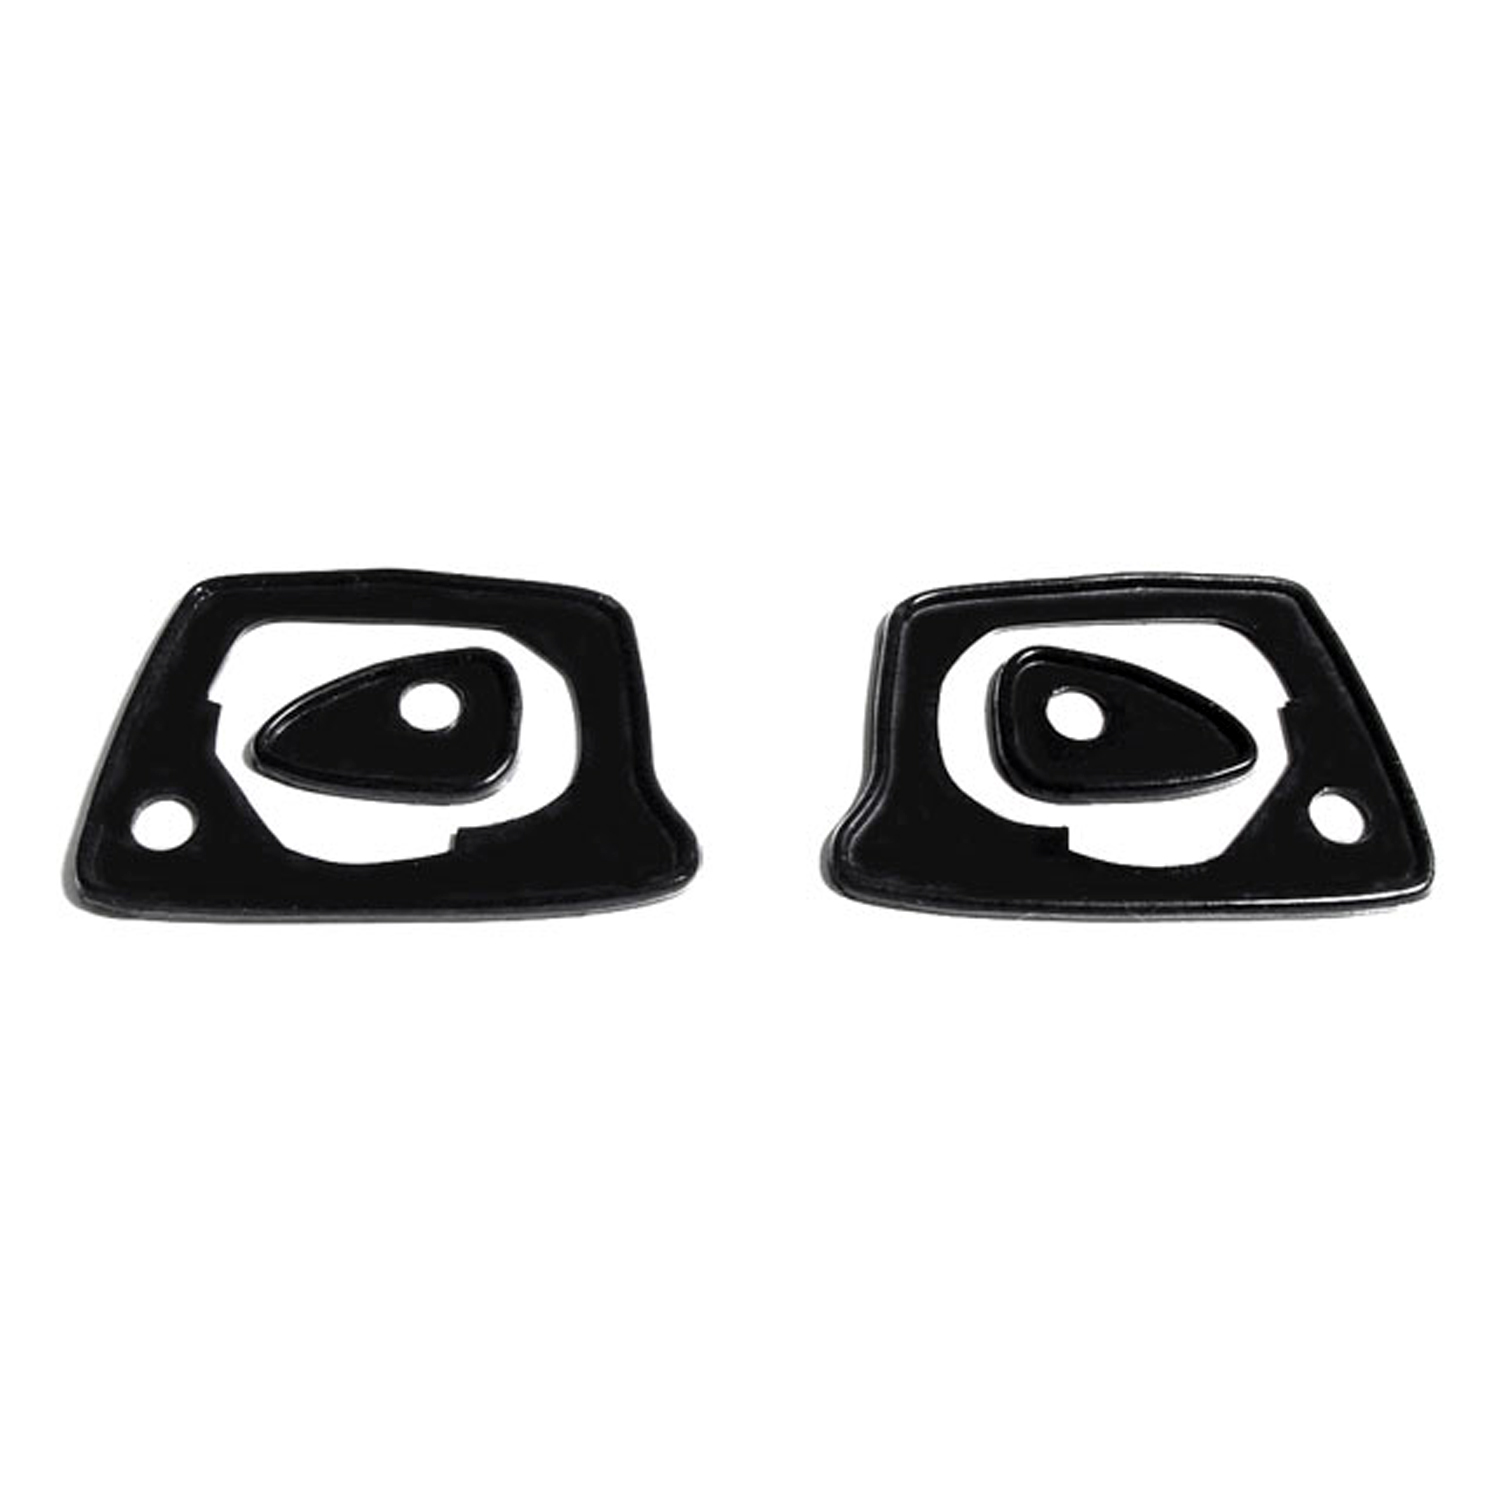 1973 Plymouth Fury III Door handle mounting pads.  2-3/8 in. L x 1-1/8 in. L-MP 959-B